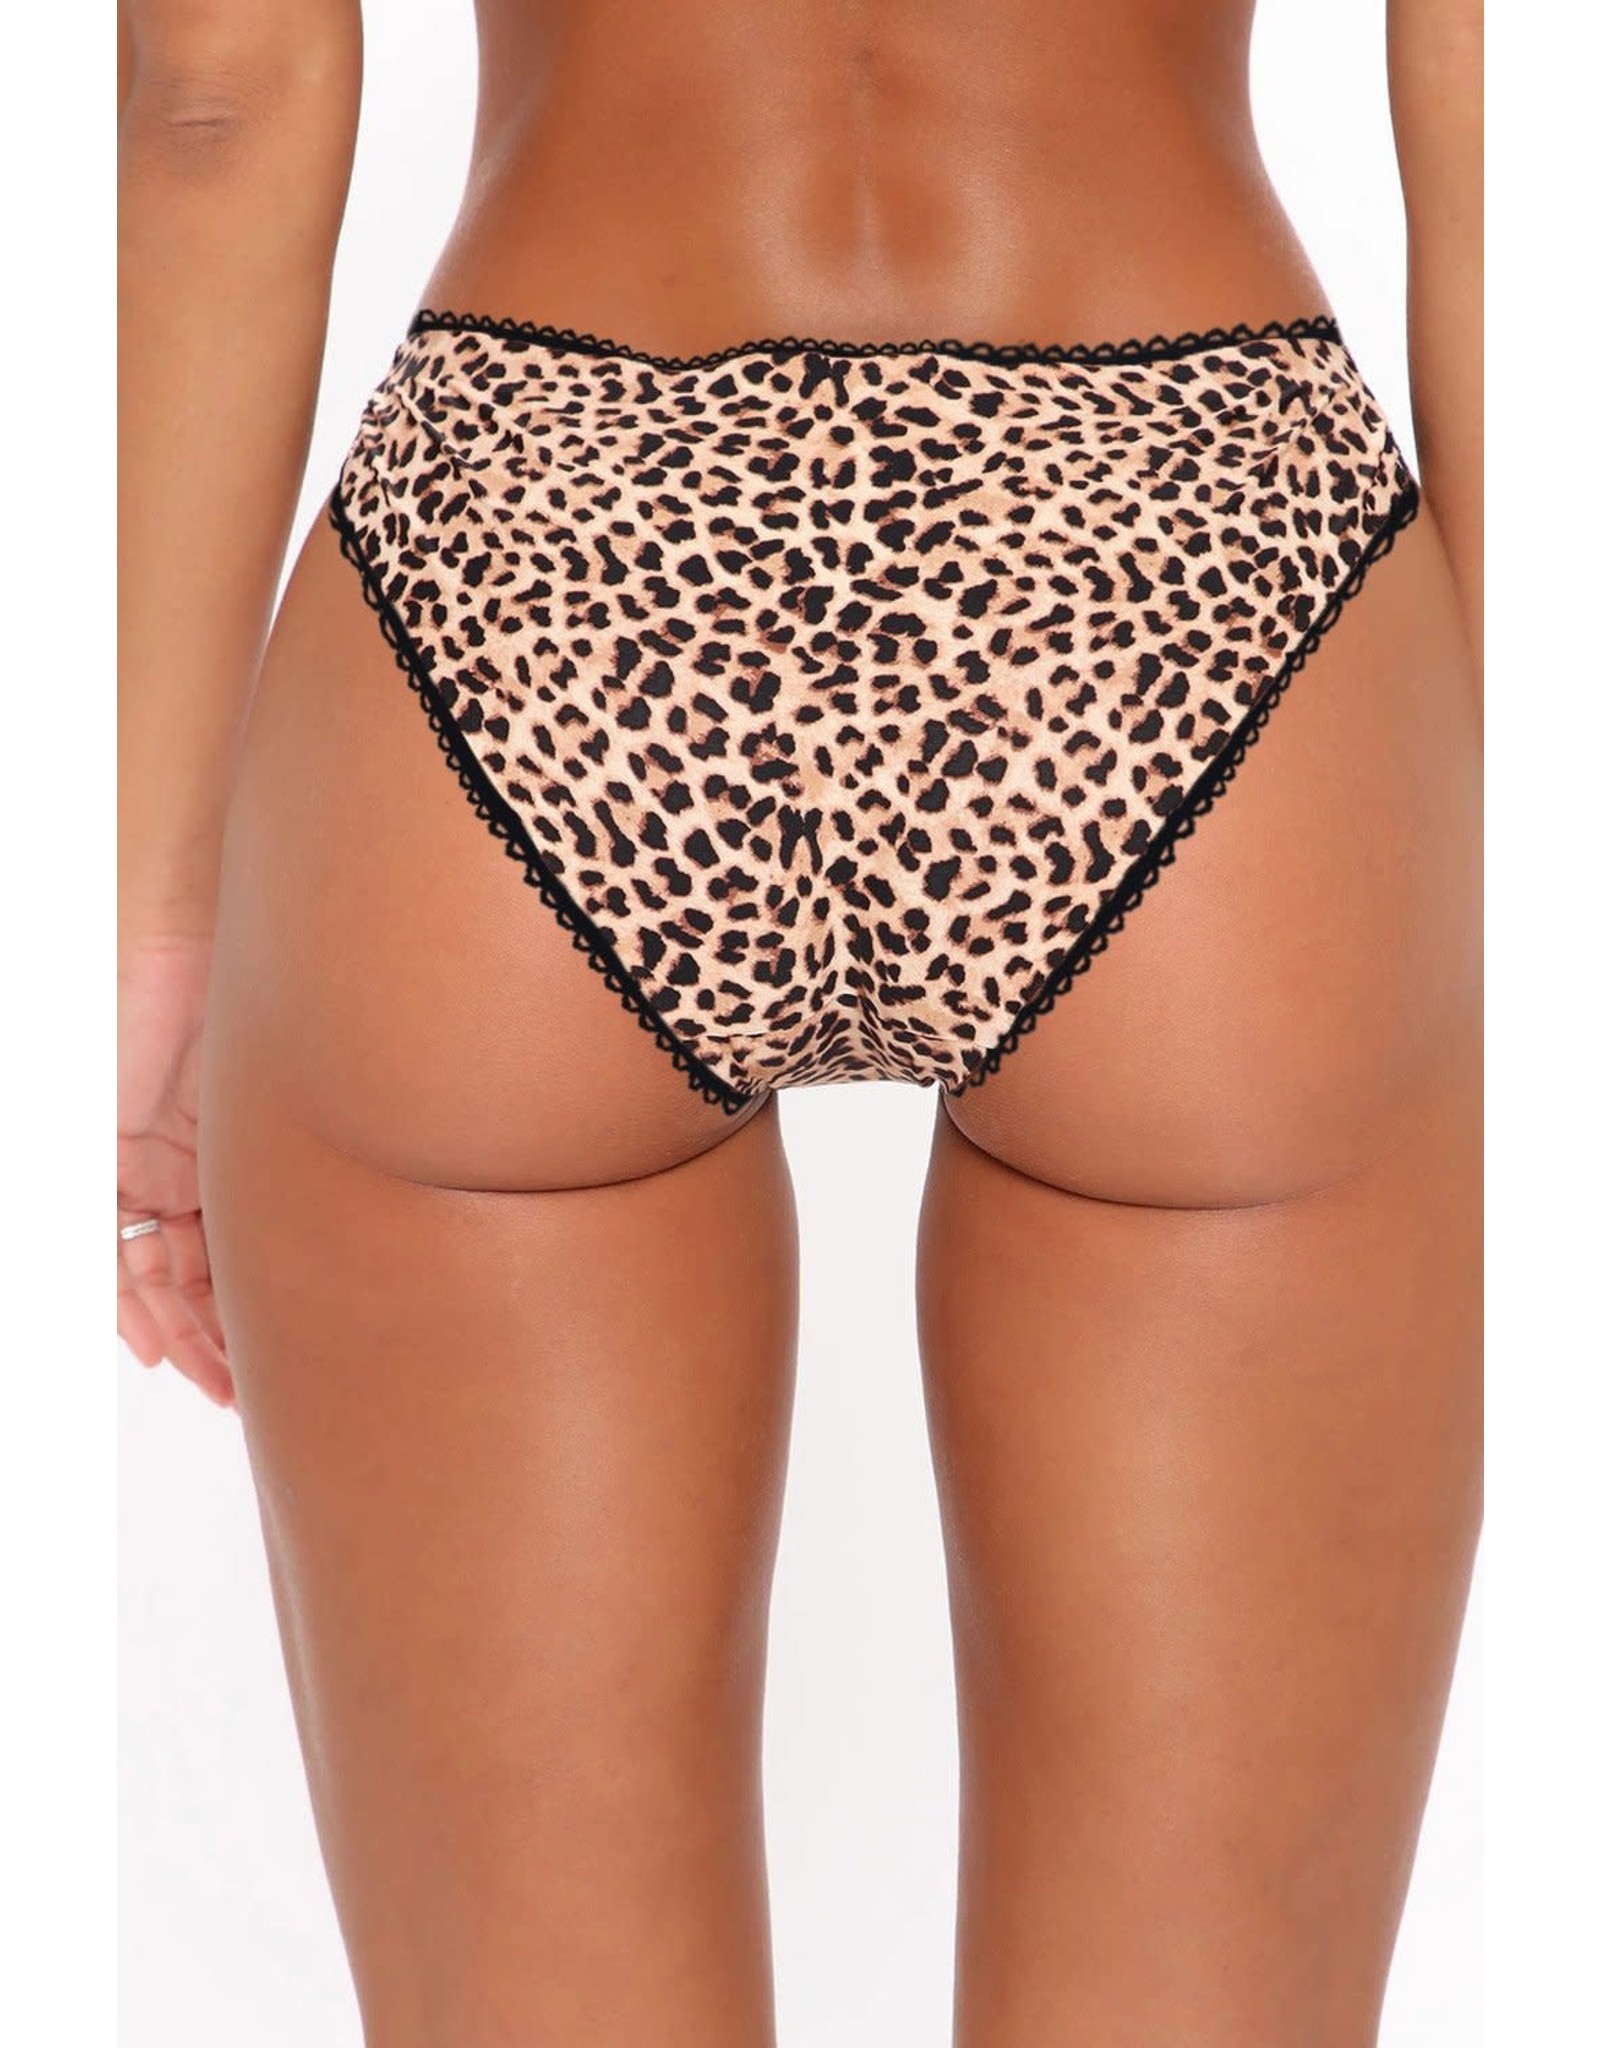 ANIMAL LEOPARD LACE PATCHWORK HOLLOW OUT WILD PANTY - (US 8-10)M